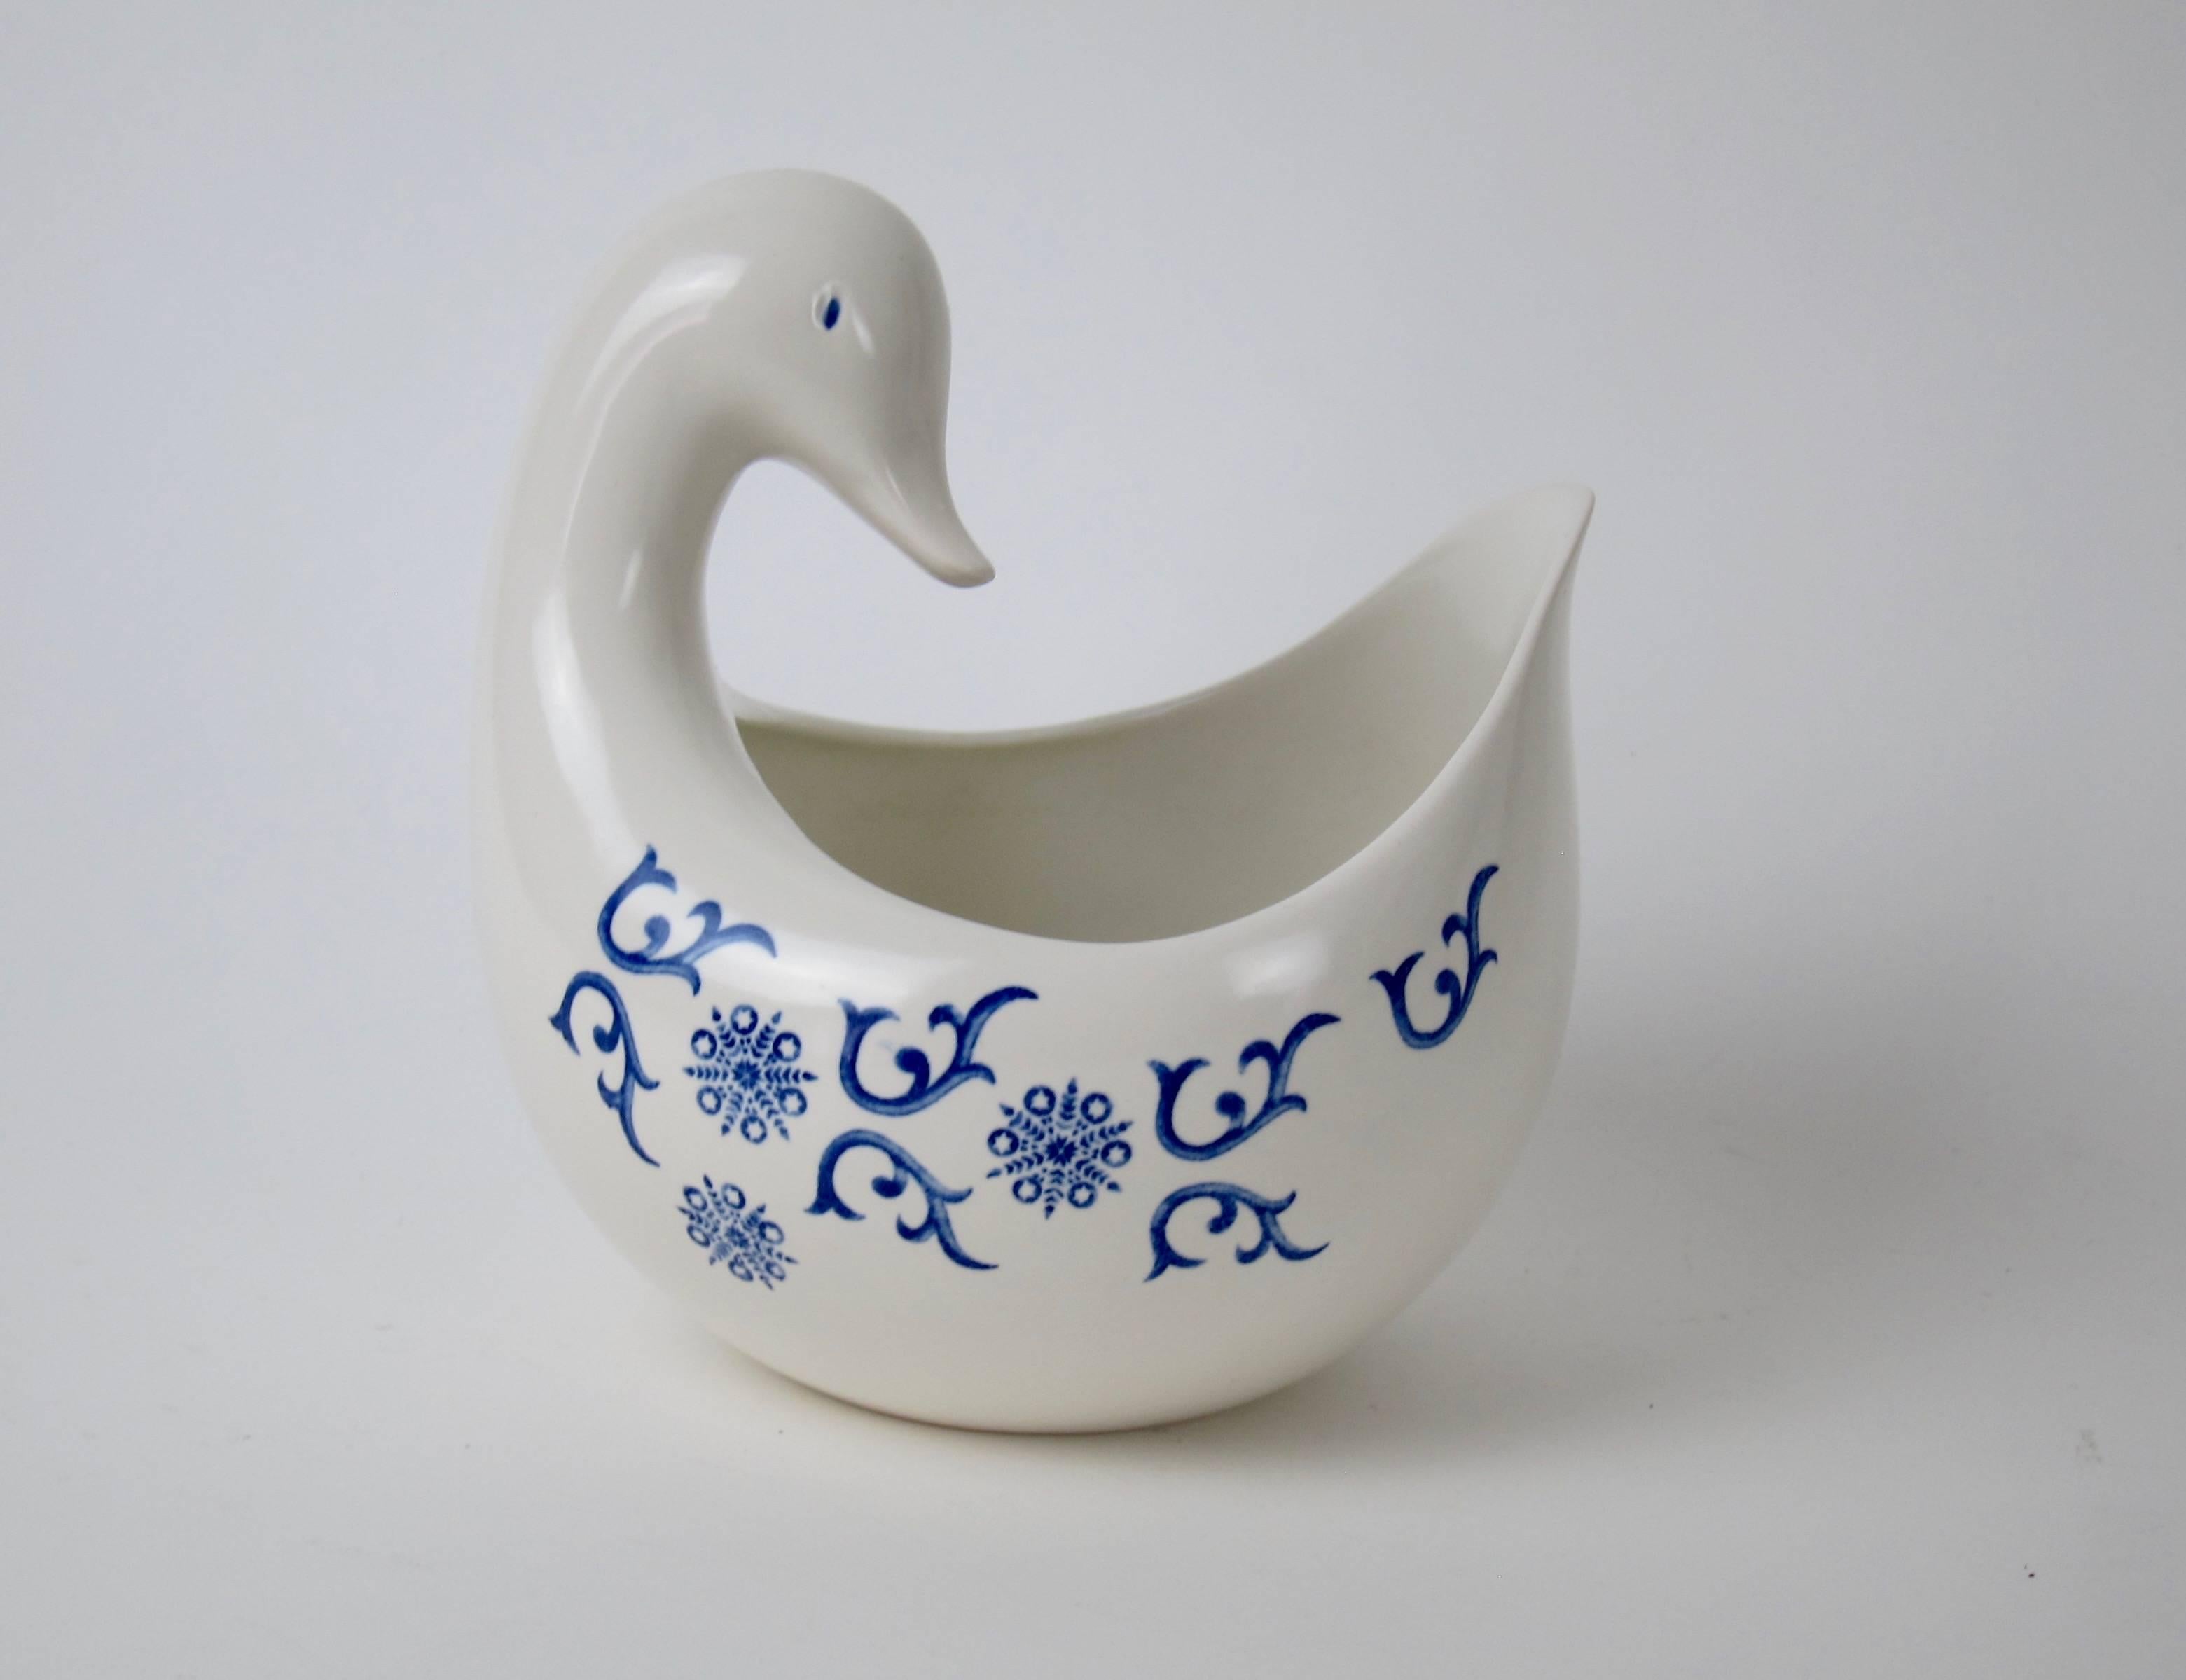 A whimsical, Mid-Century open vegetable or serving bowl designed by Eva Zeisel for Schmid International in the Stratford pattern featuring blue, abstract scrolls against a white ground. The open, bird shaped bowl either a duck or goose was